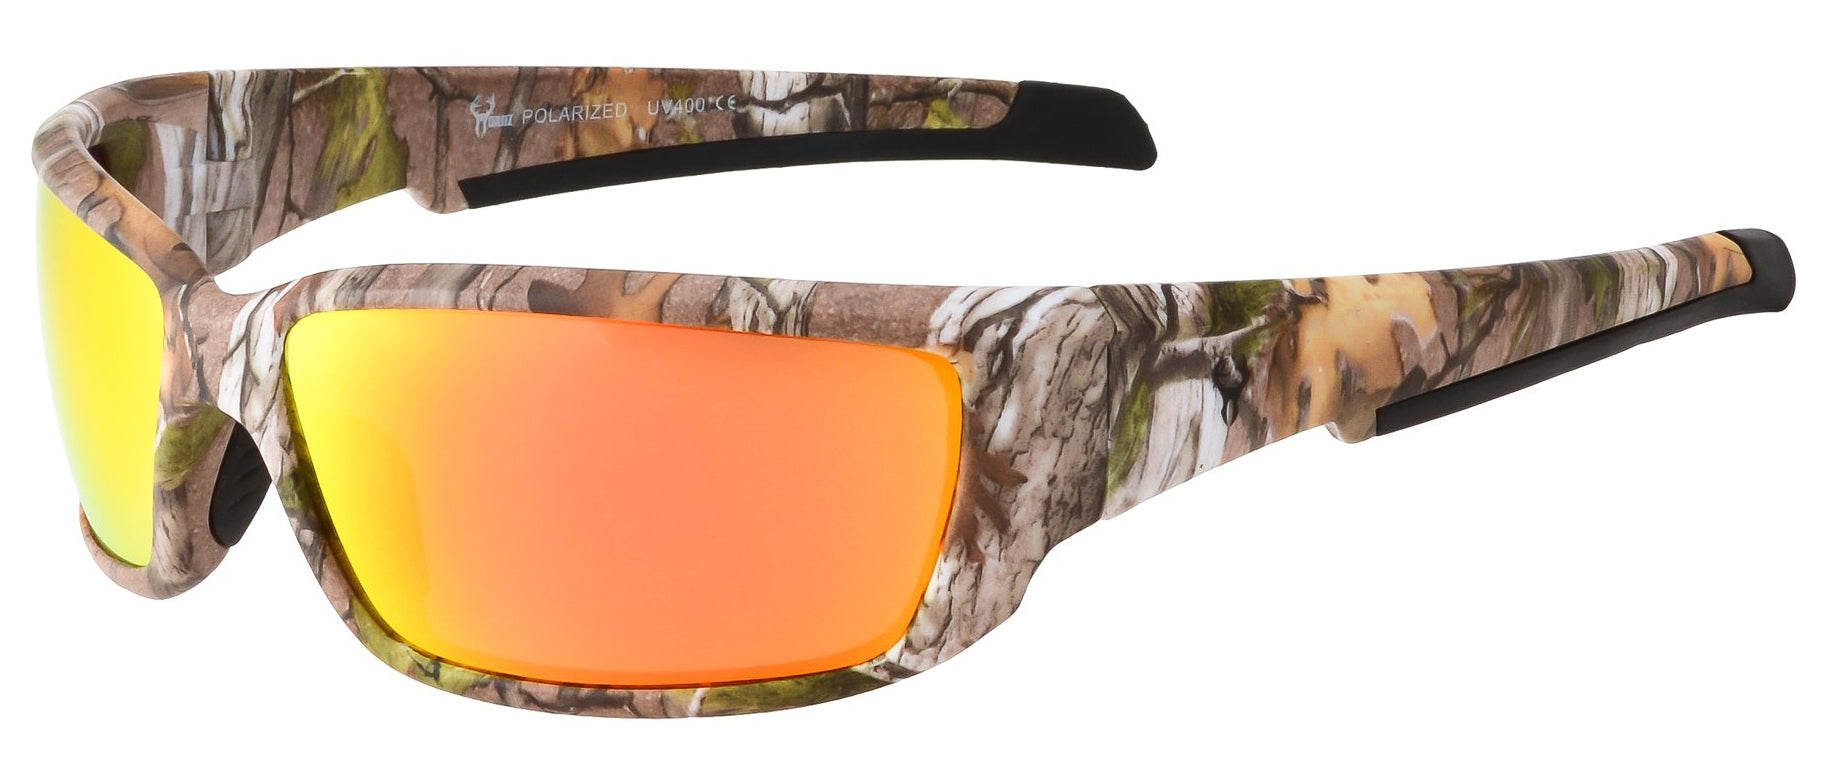 Brown Forest Camouflage Polarized Sunglasses for Men - WhiteTail - Free  Matching Microfiber Pouch